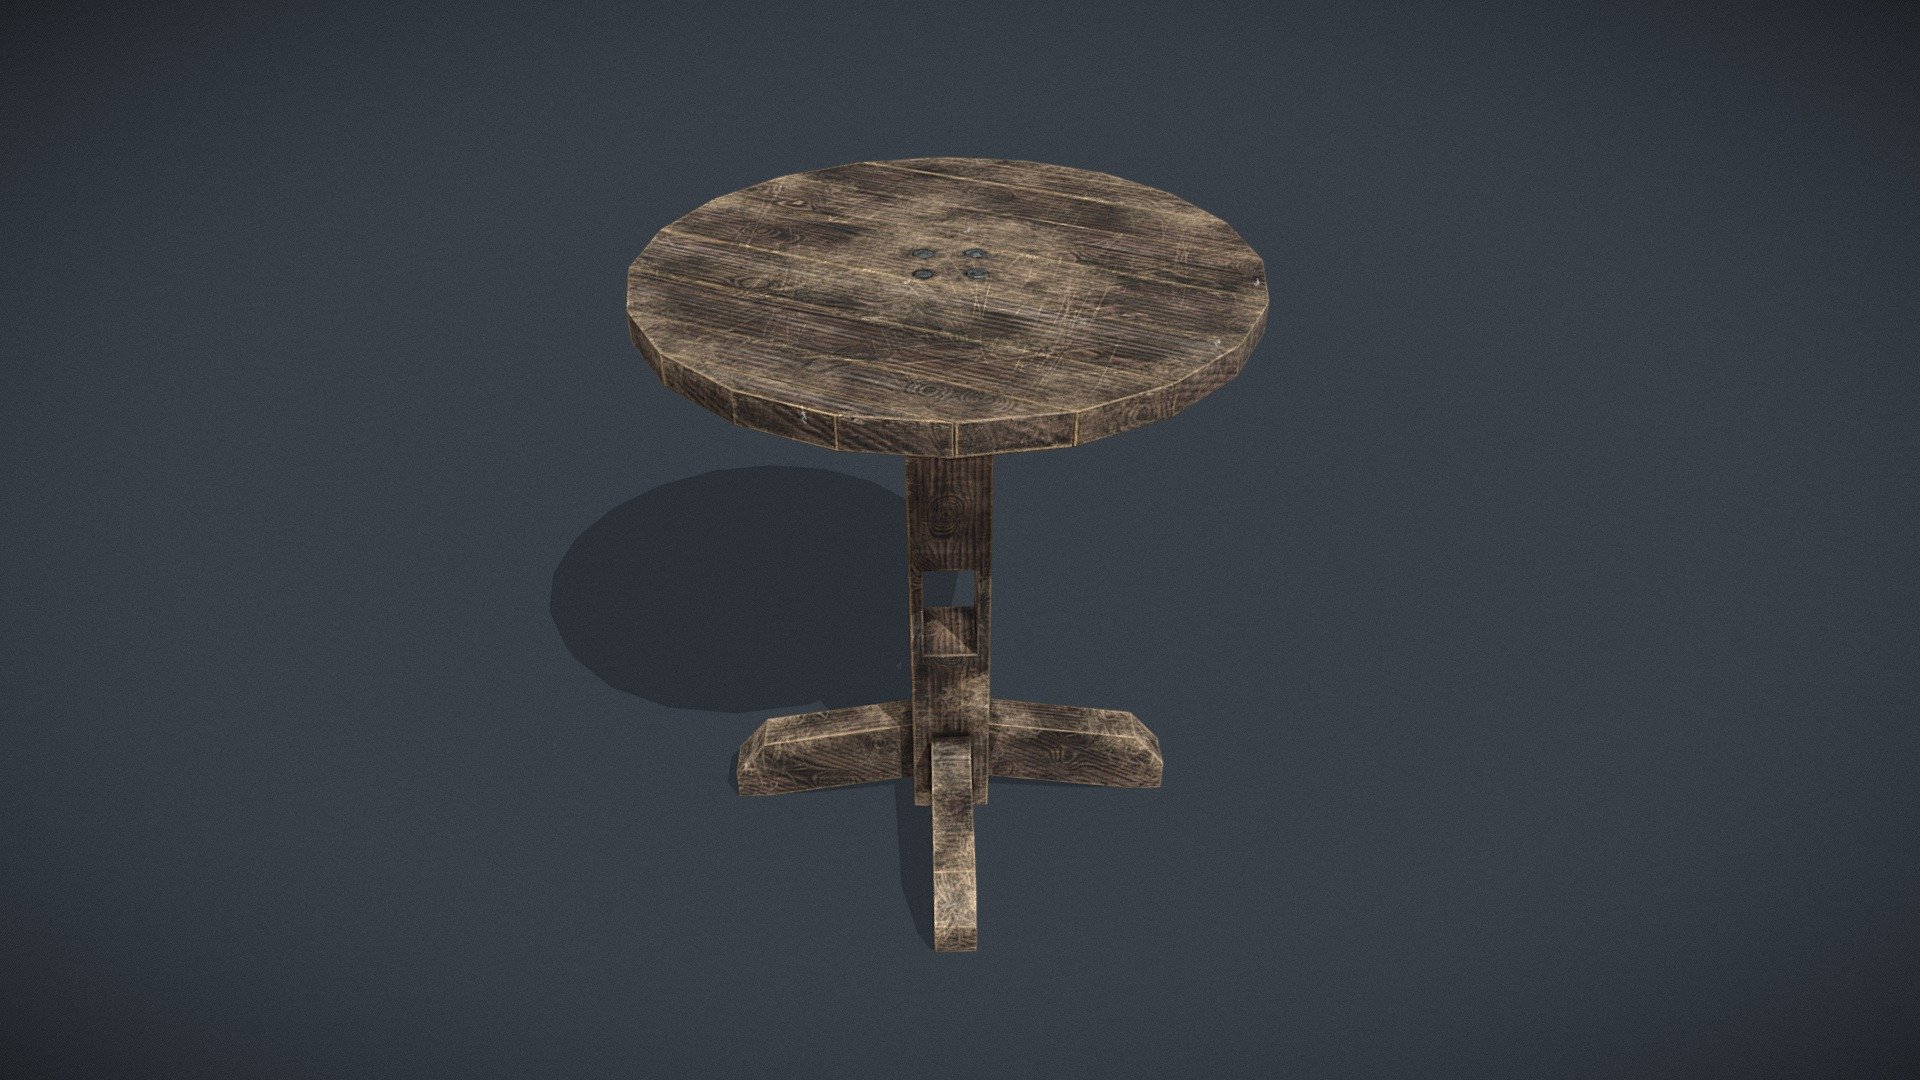 Round Tavern Table 3D Model PBR Texture available Customer Service Guaranteed. From the Creators at Get Dead Entertainment. Please like and Rate! Follow us on FaceBook and Instagram to keep updated on all our newest models. https://www.facebook.com/GetDeadEntertainment/ - Round_Tavern_Table - Buy Royalty Free 3D model by GetDeadEntertainment 3d model